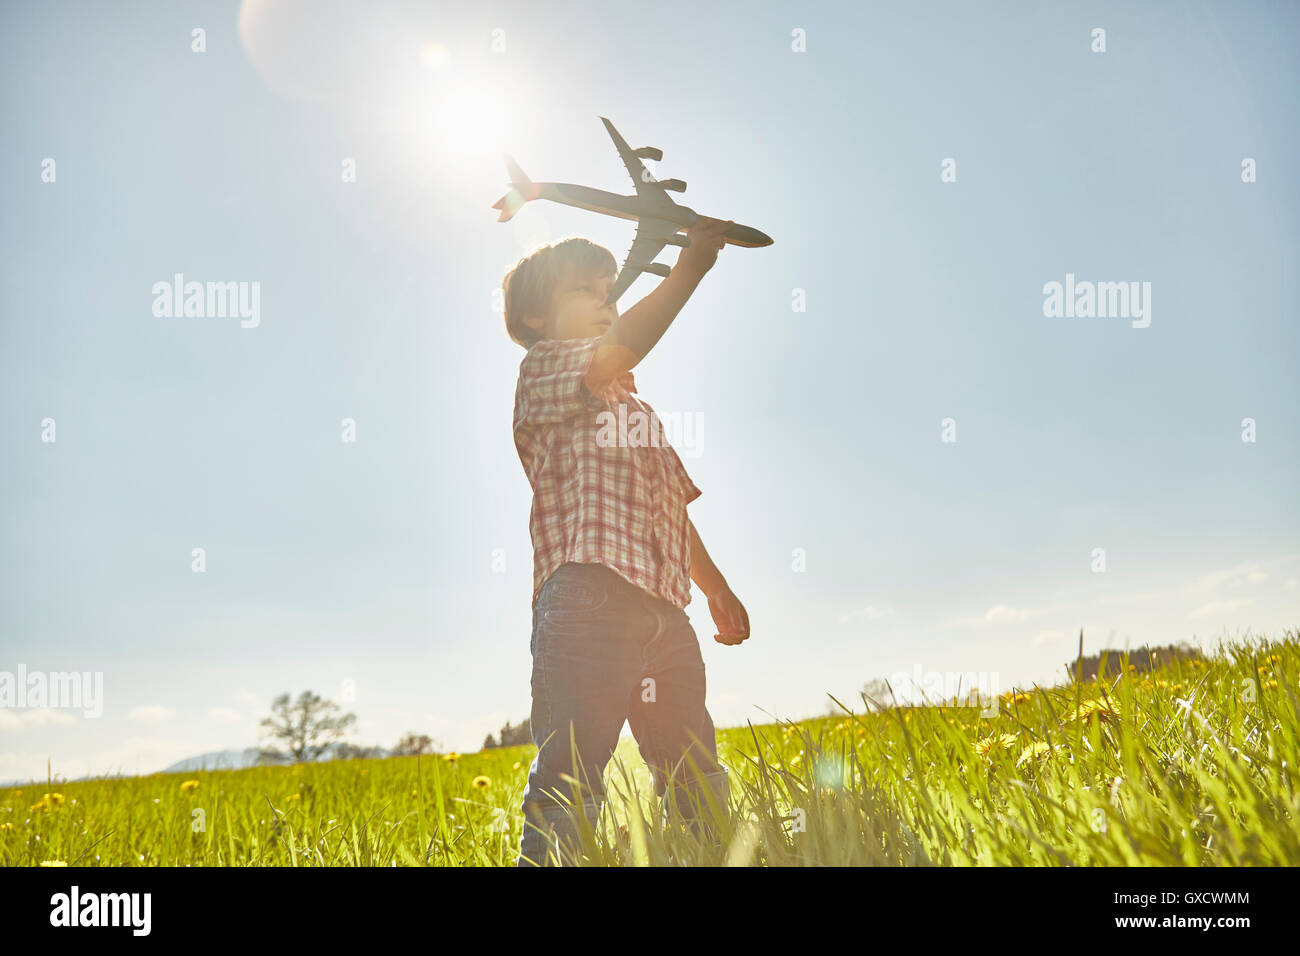 Boy in sunlit champ avec ciel bleu Playing with toy airplane Banque D'Images